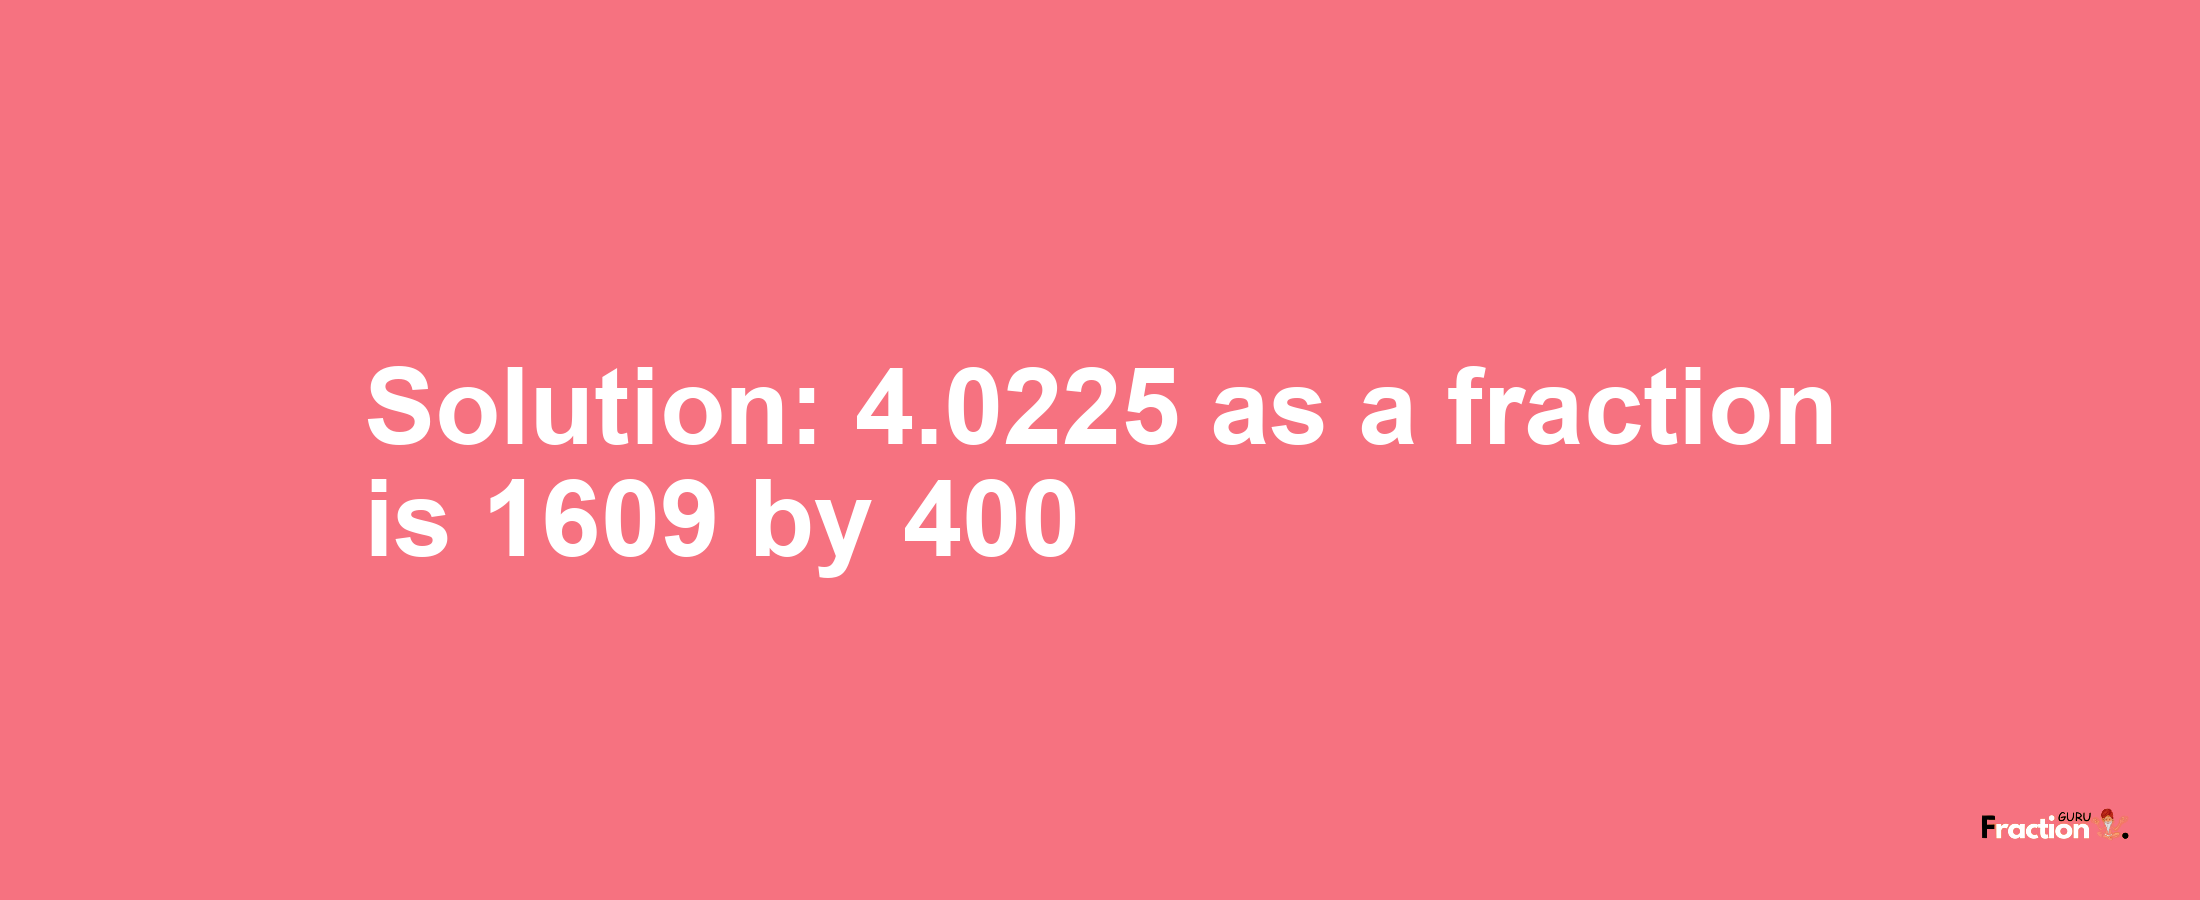 Solution:4.0225 as a fraction is 1609/400